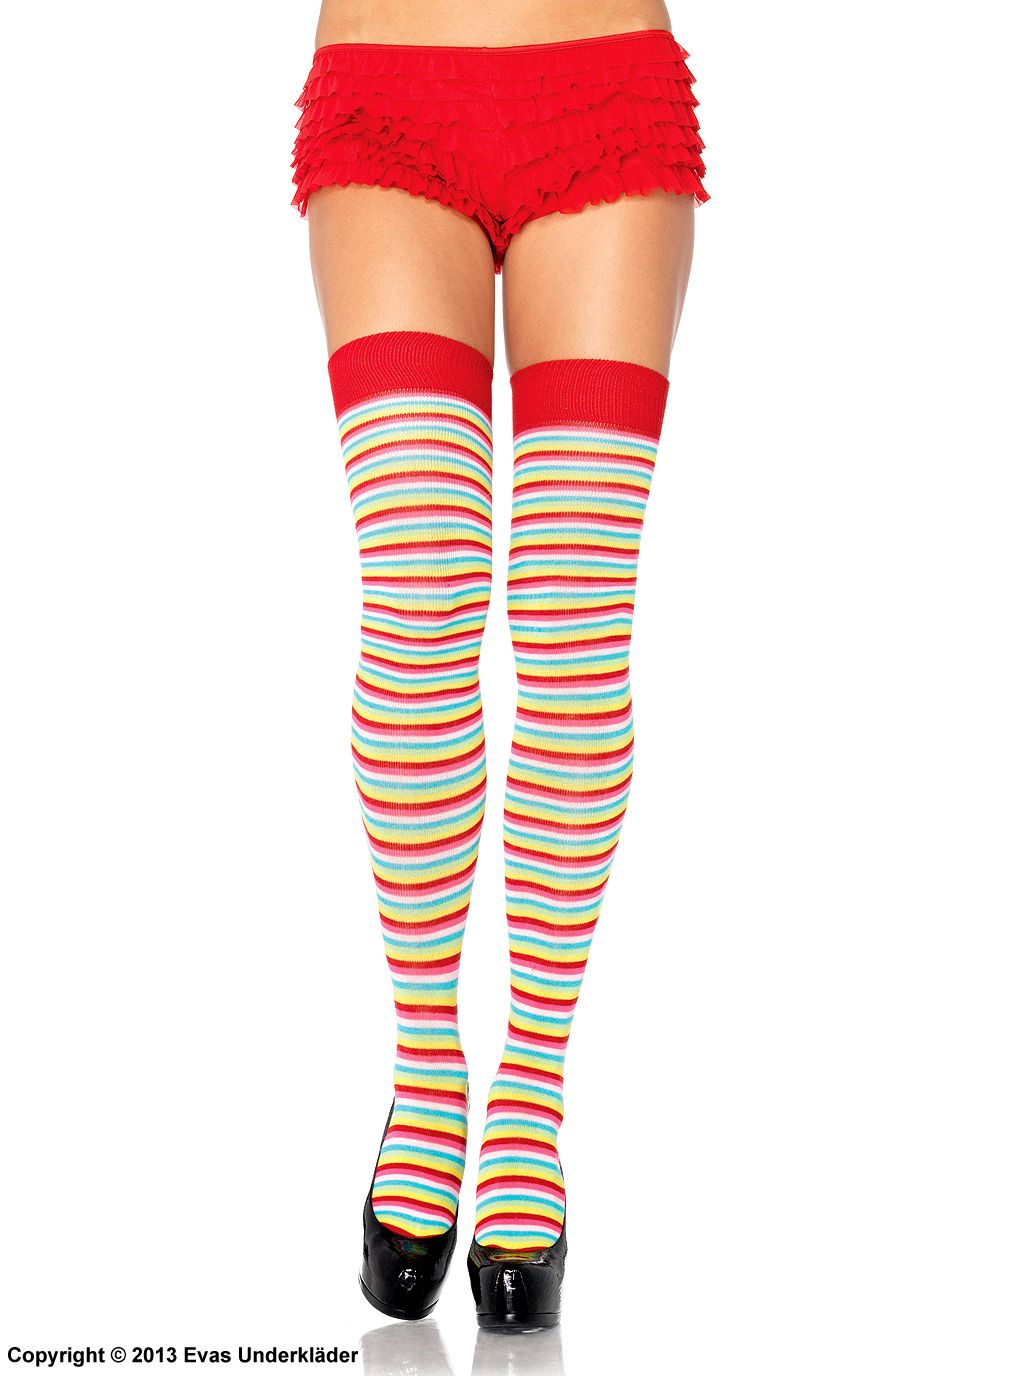 Thigh high stay-ups, colorful stripes